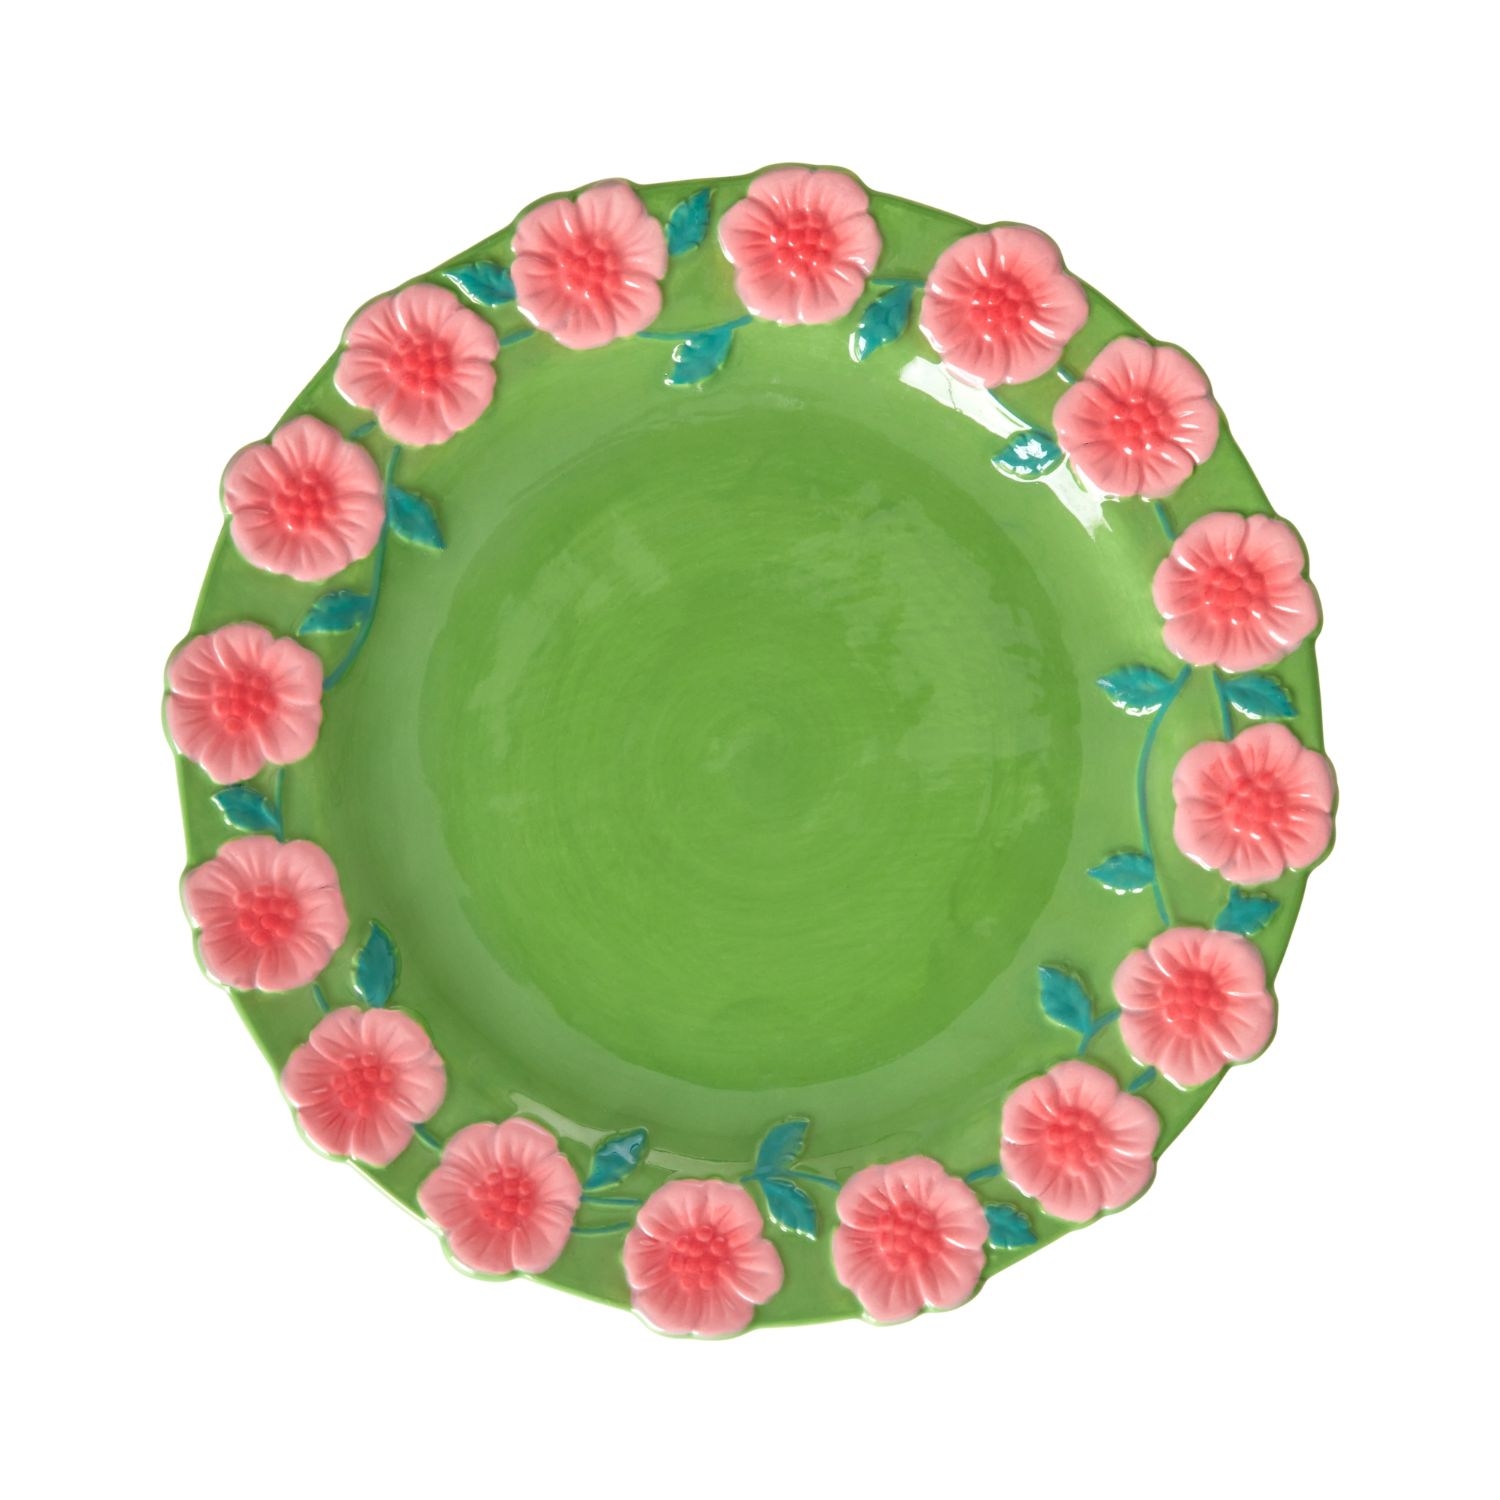 Rice Ceramic Lunch Plate with Embossed Flower Design - Green